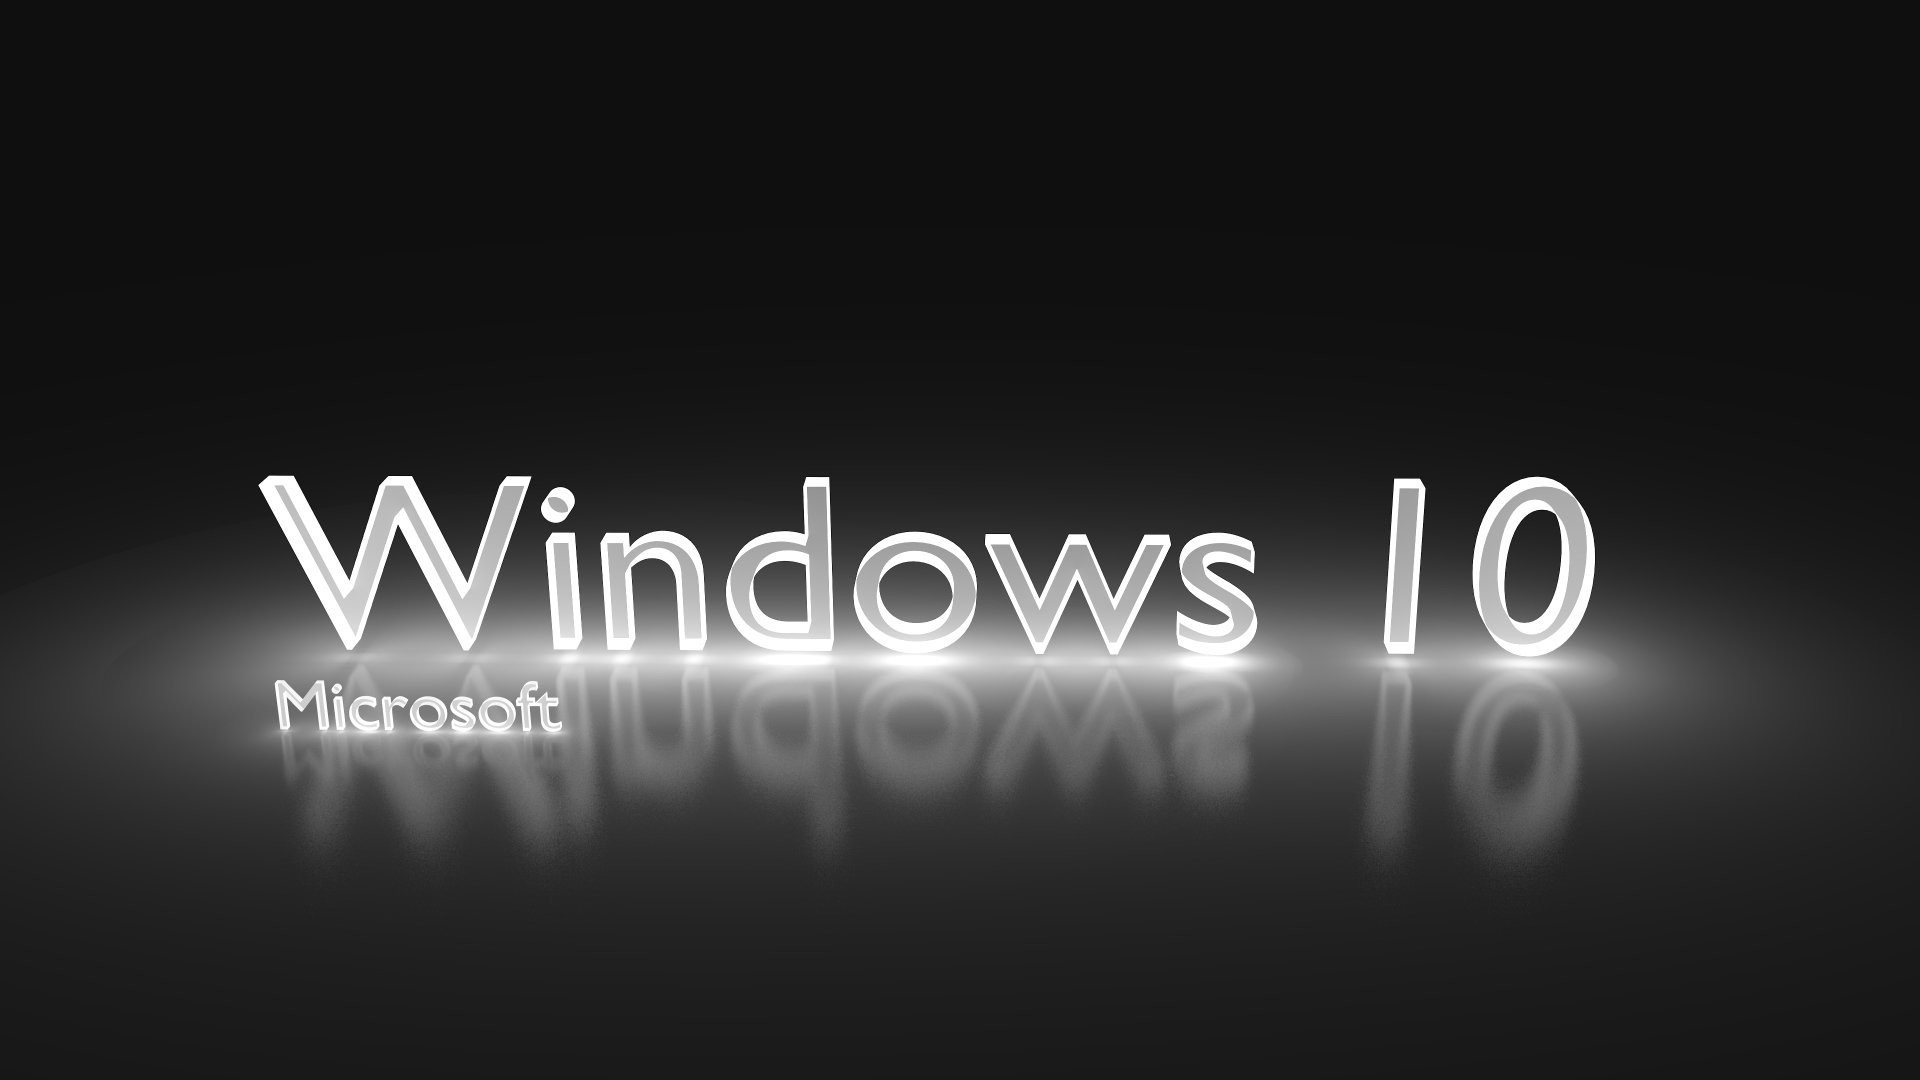 1920x1080 laptop wallpapers hd for windows 10 #140586